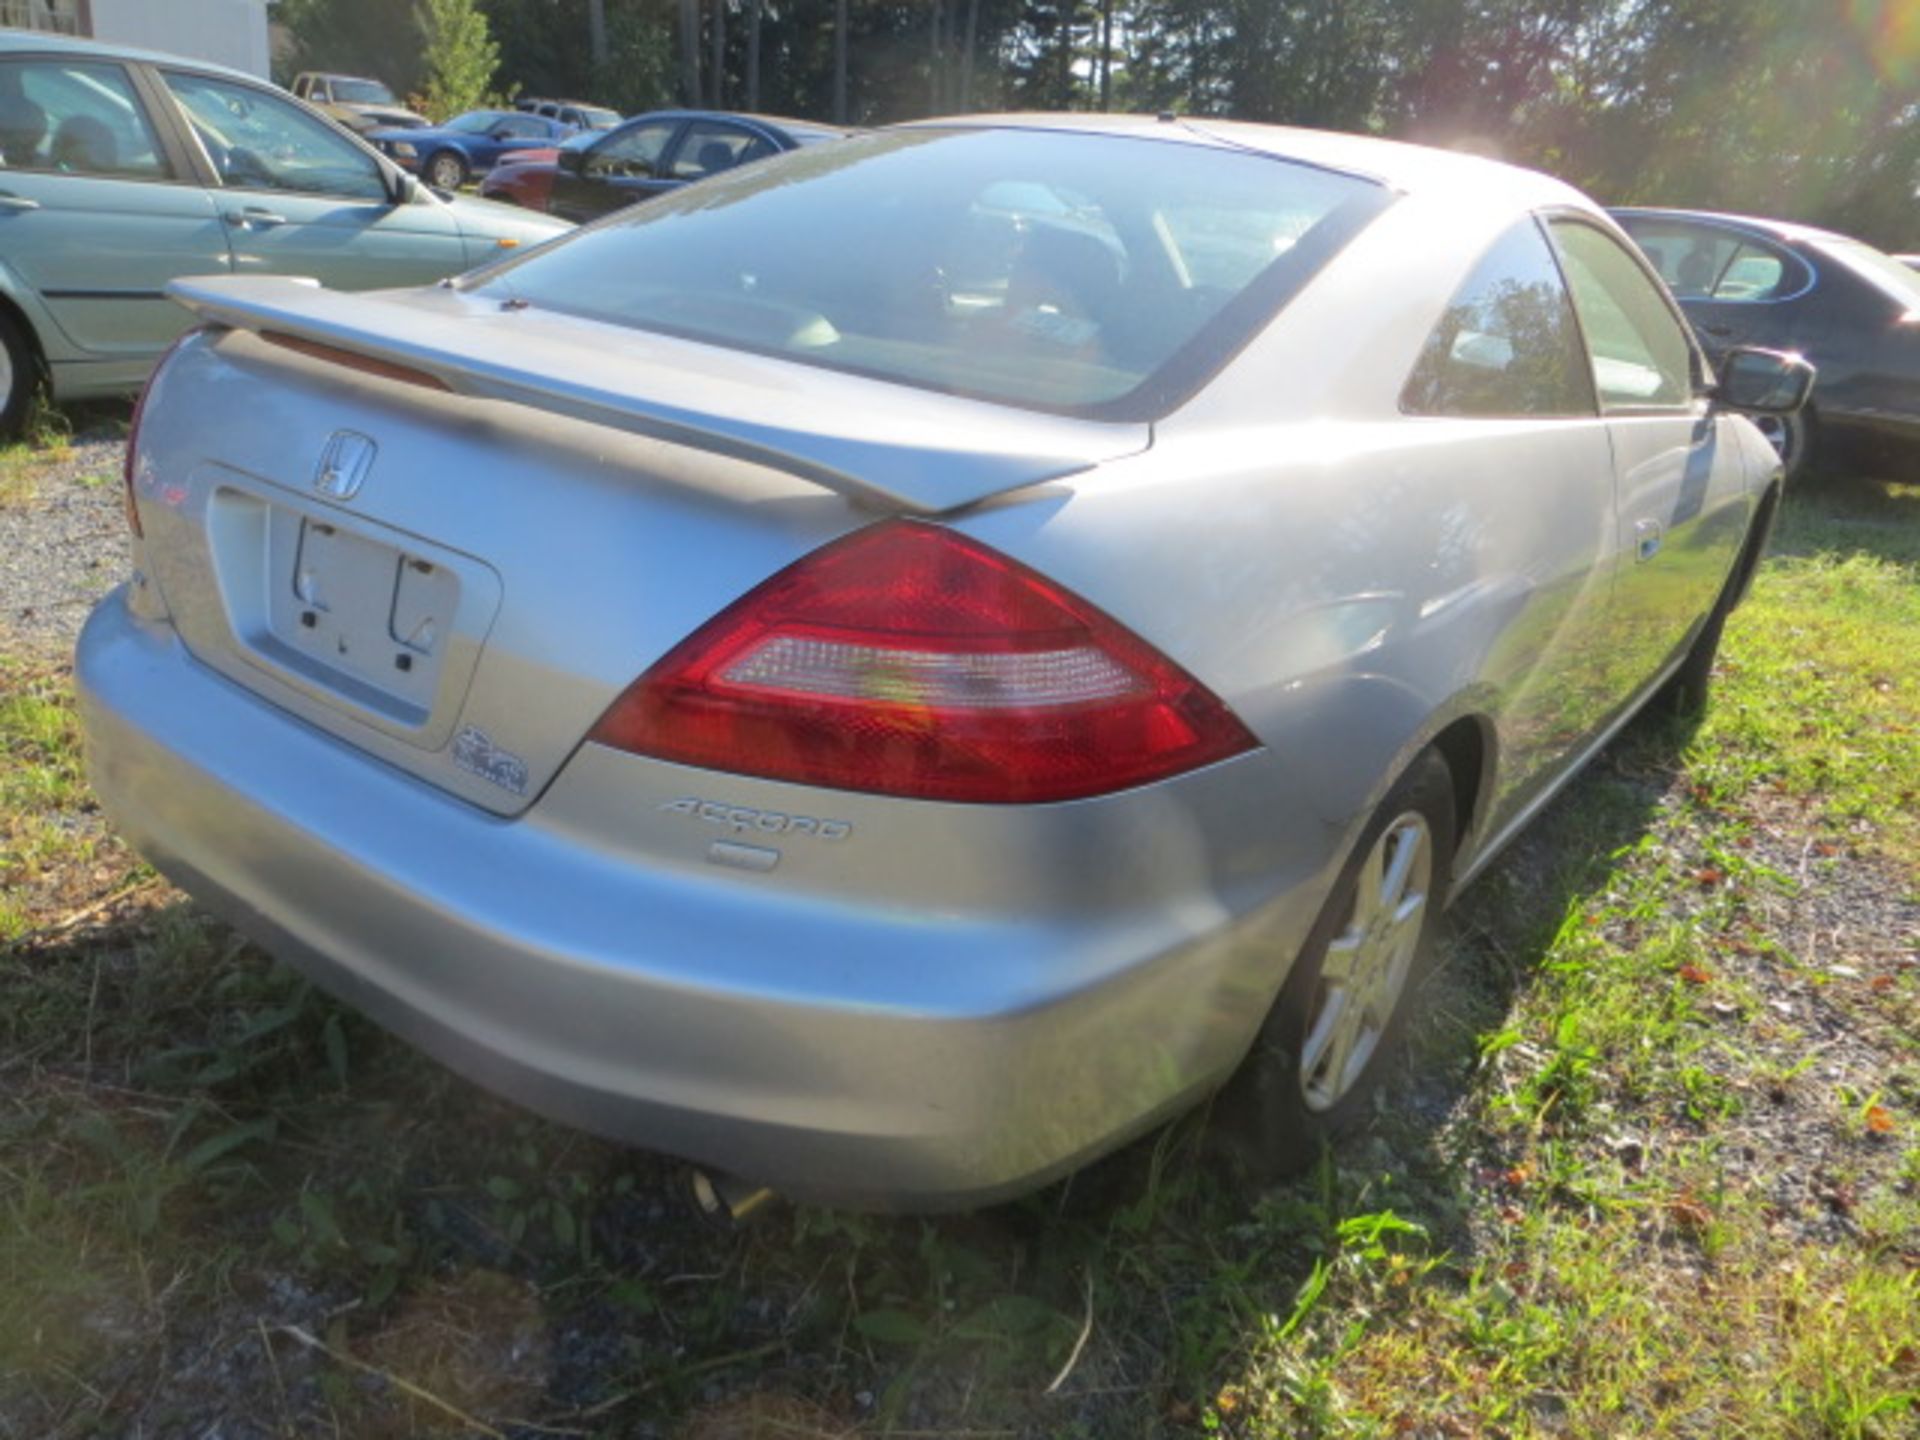 2003 Honda Accord-NEEDS TRANSMISSION UKNOWN MILES,VIN 1HGCM82663A016768, SOLD WITH GOOD TRANSFER - Image 3 of 3